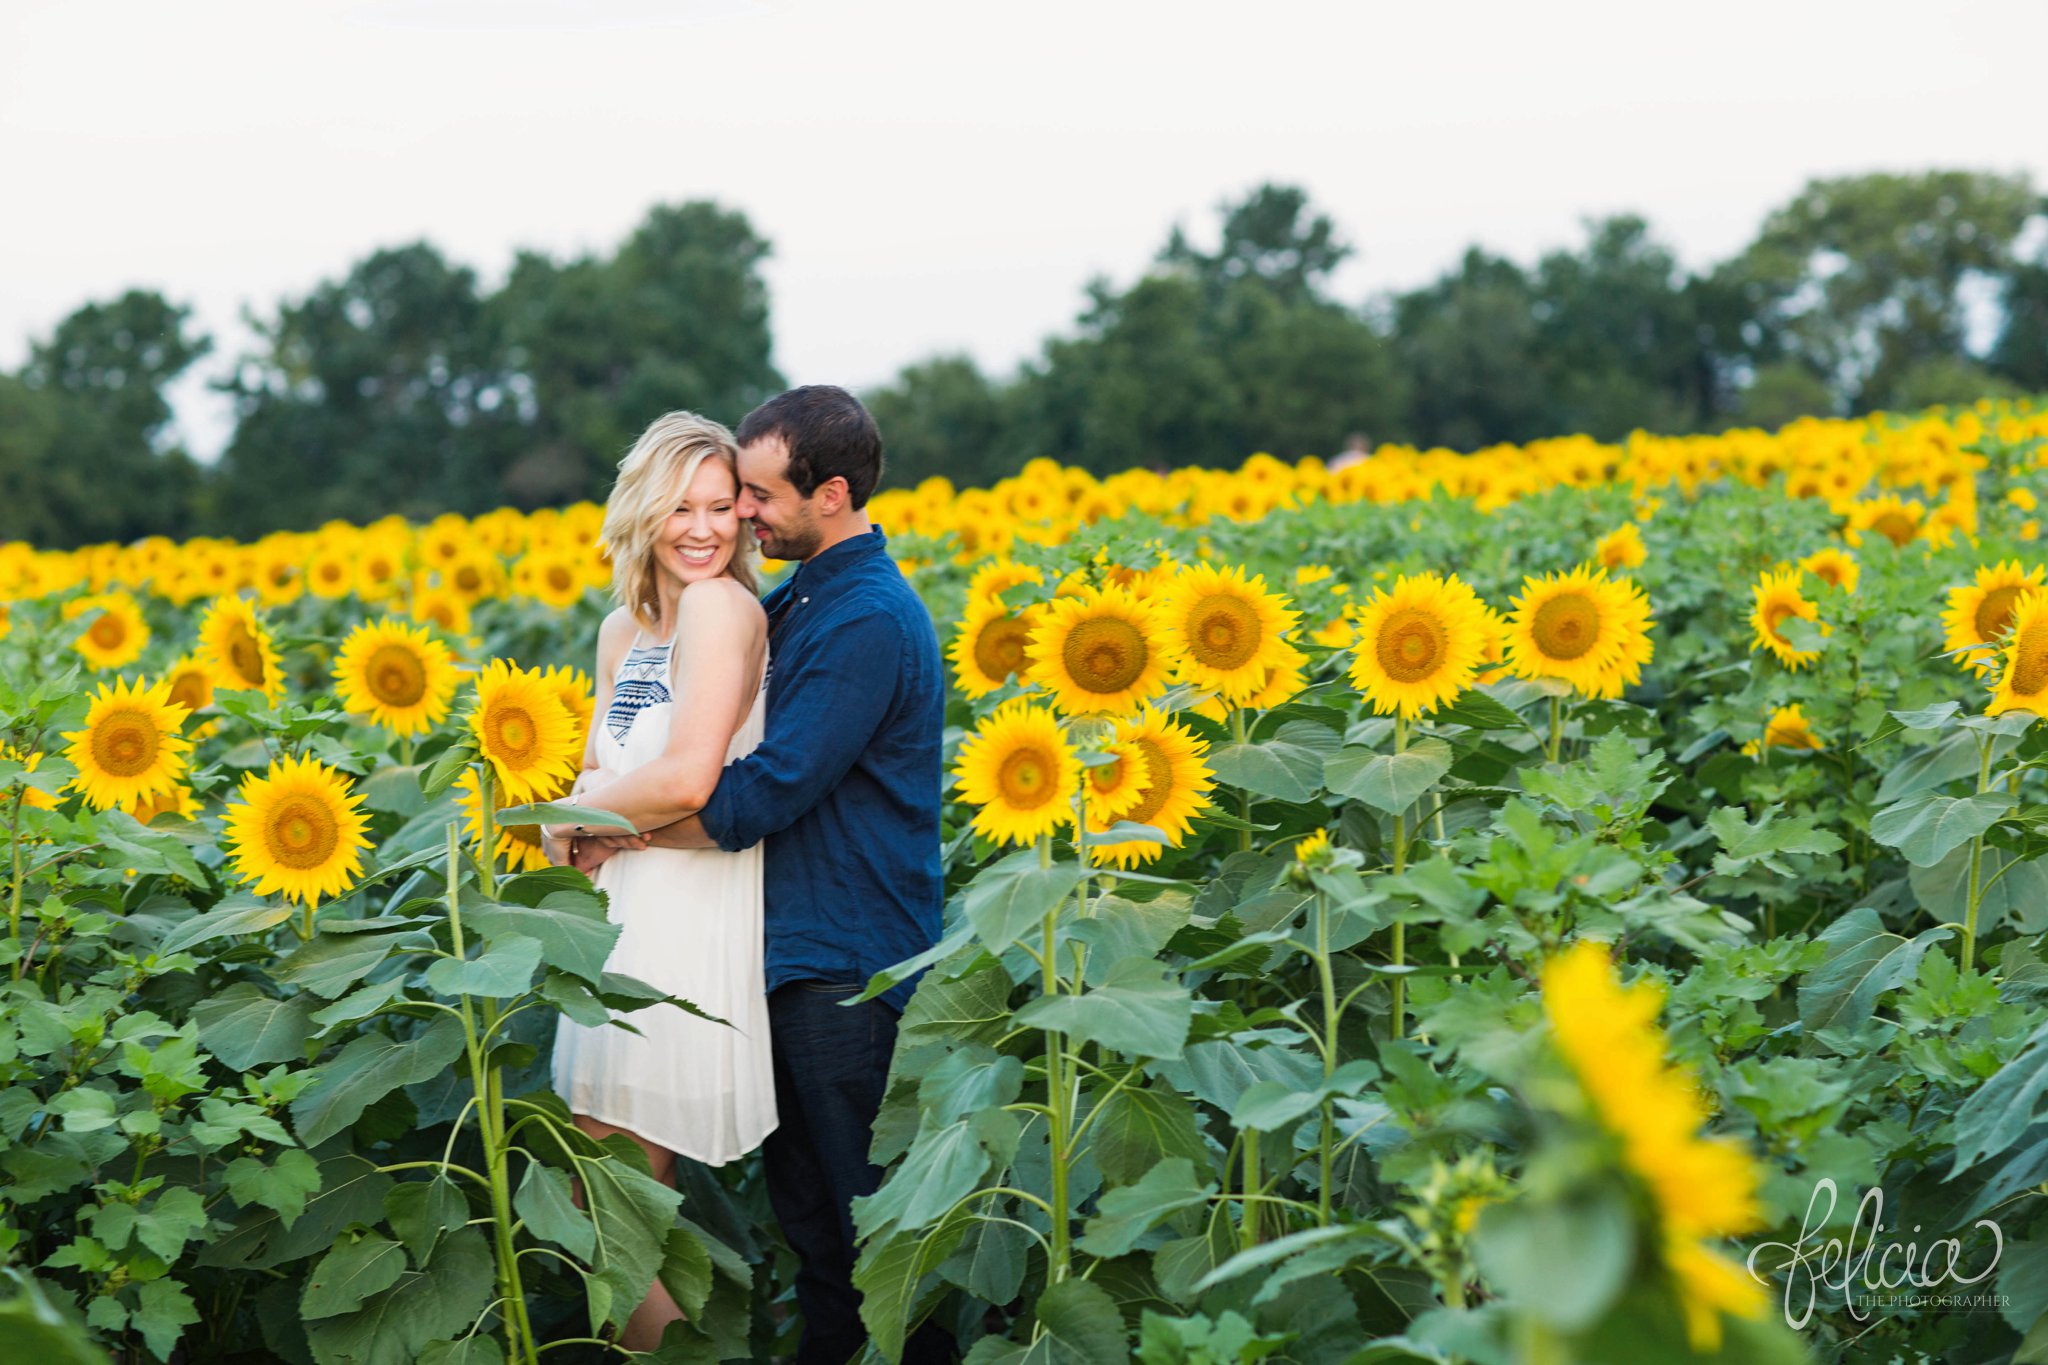 Sunrise Engagement Photos | Felicia The Photographer | Sunflower field | snuggle from behind